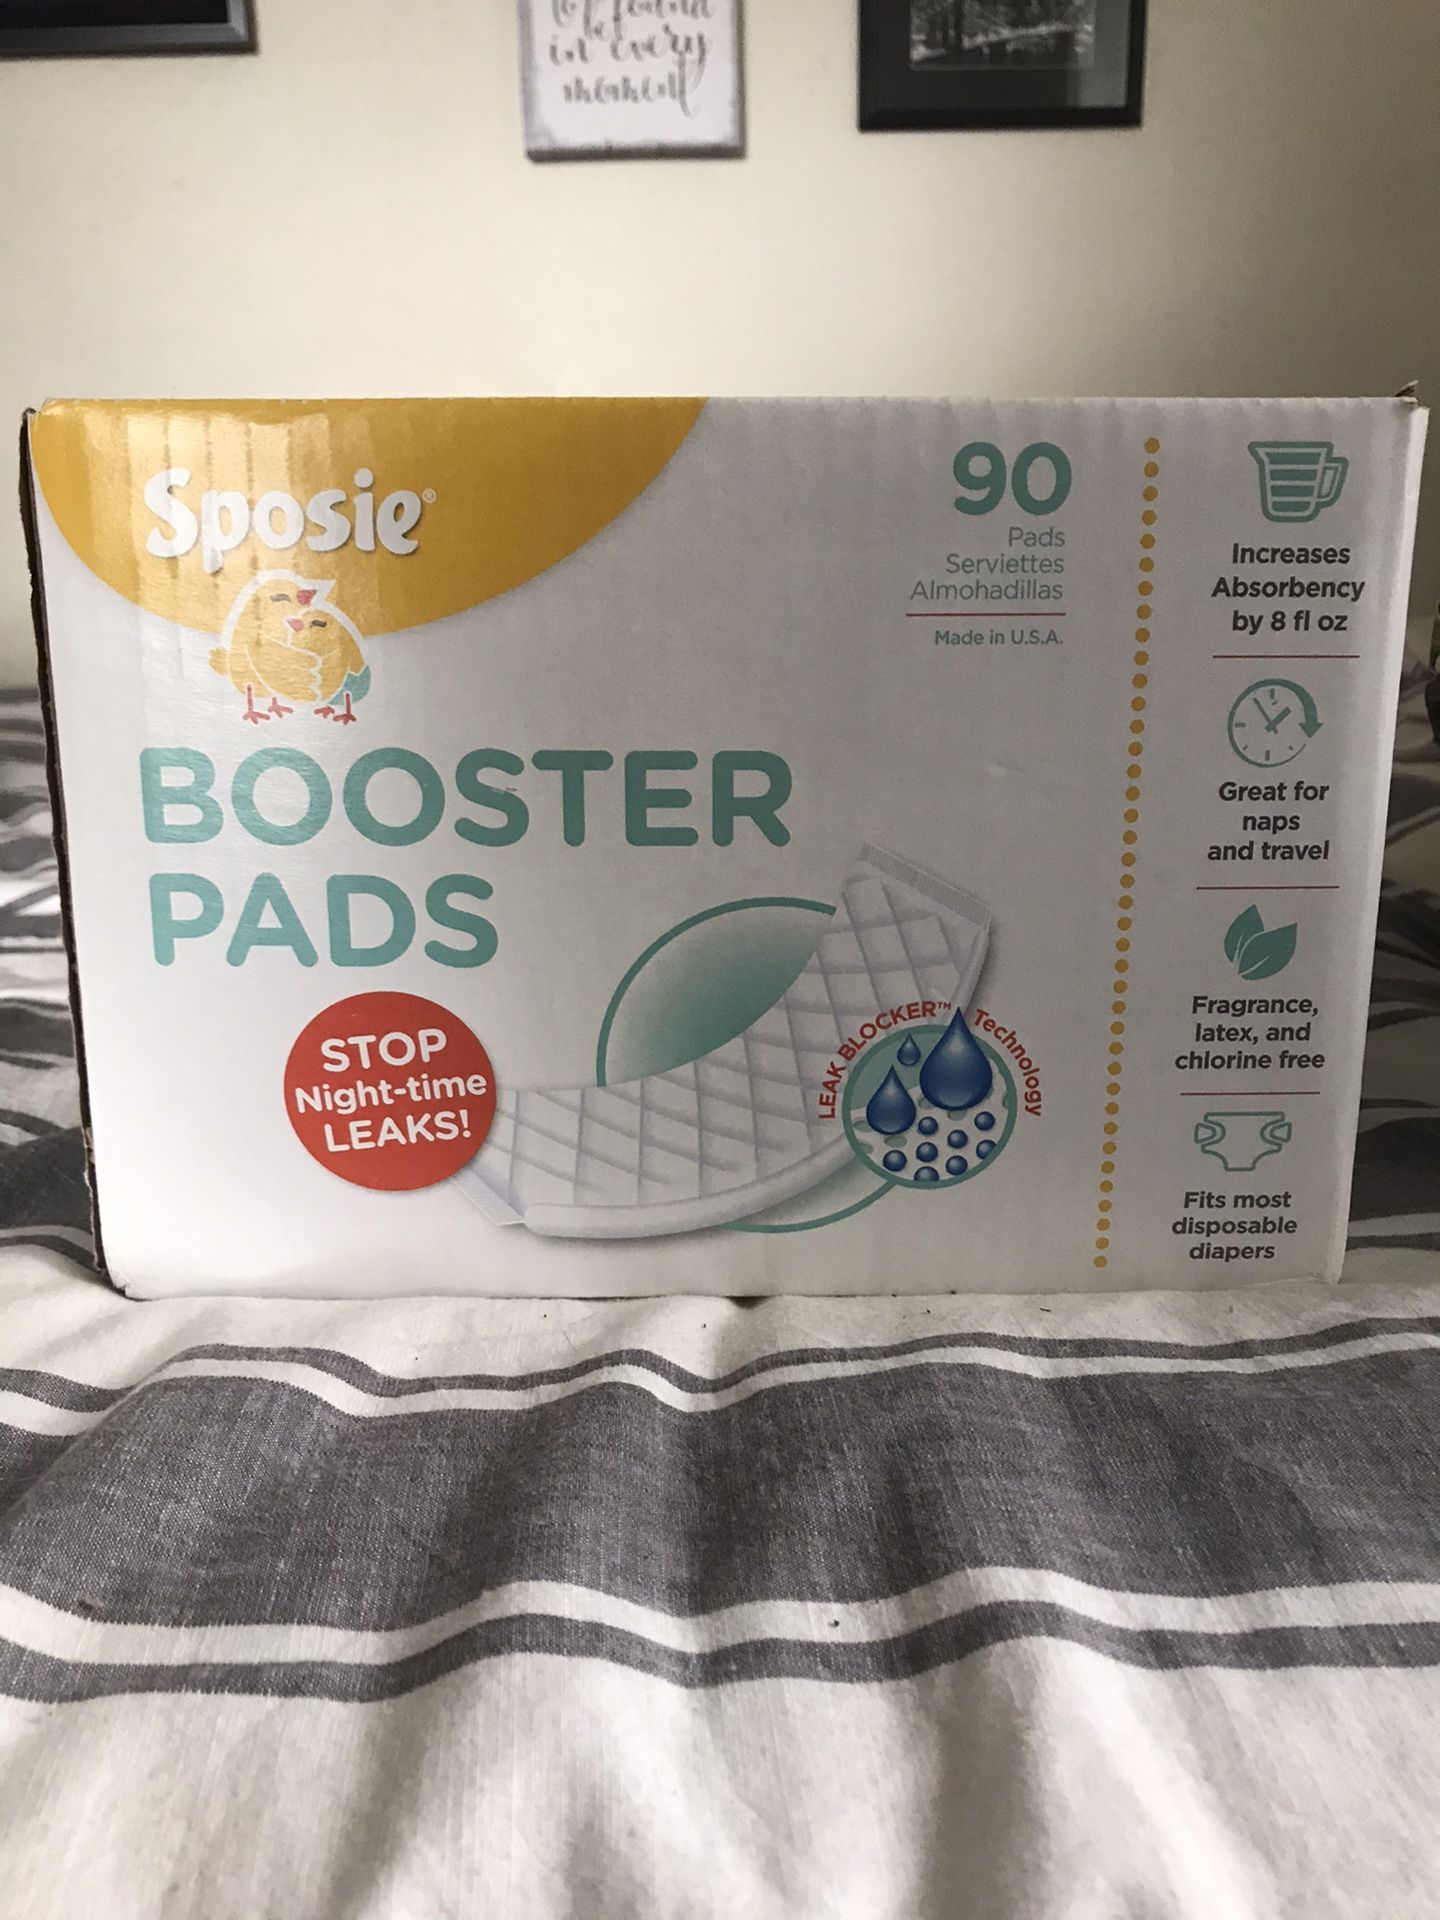 Booster pads for inside of baby diapers